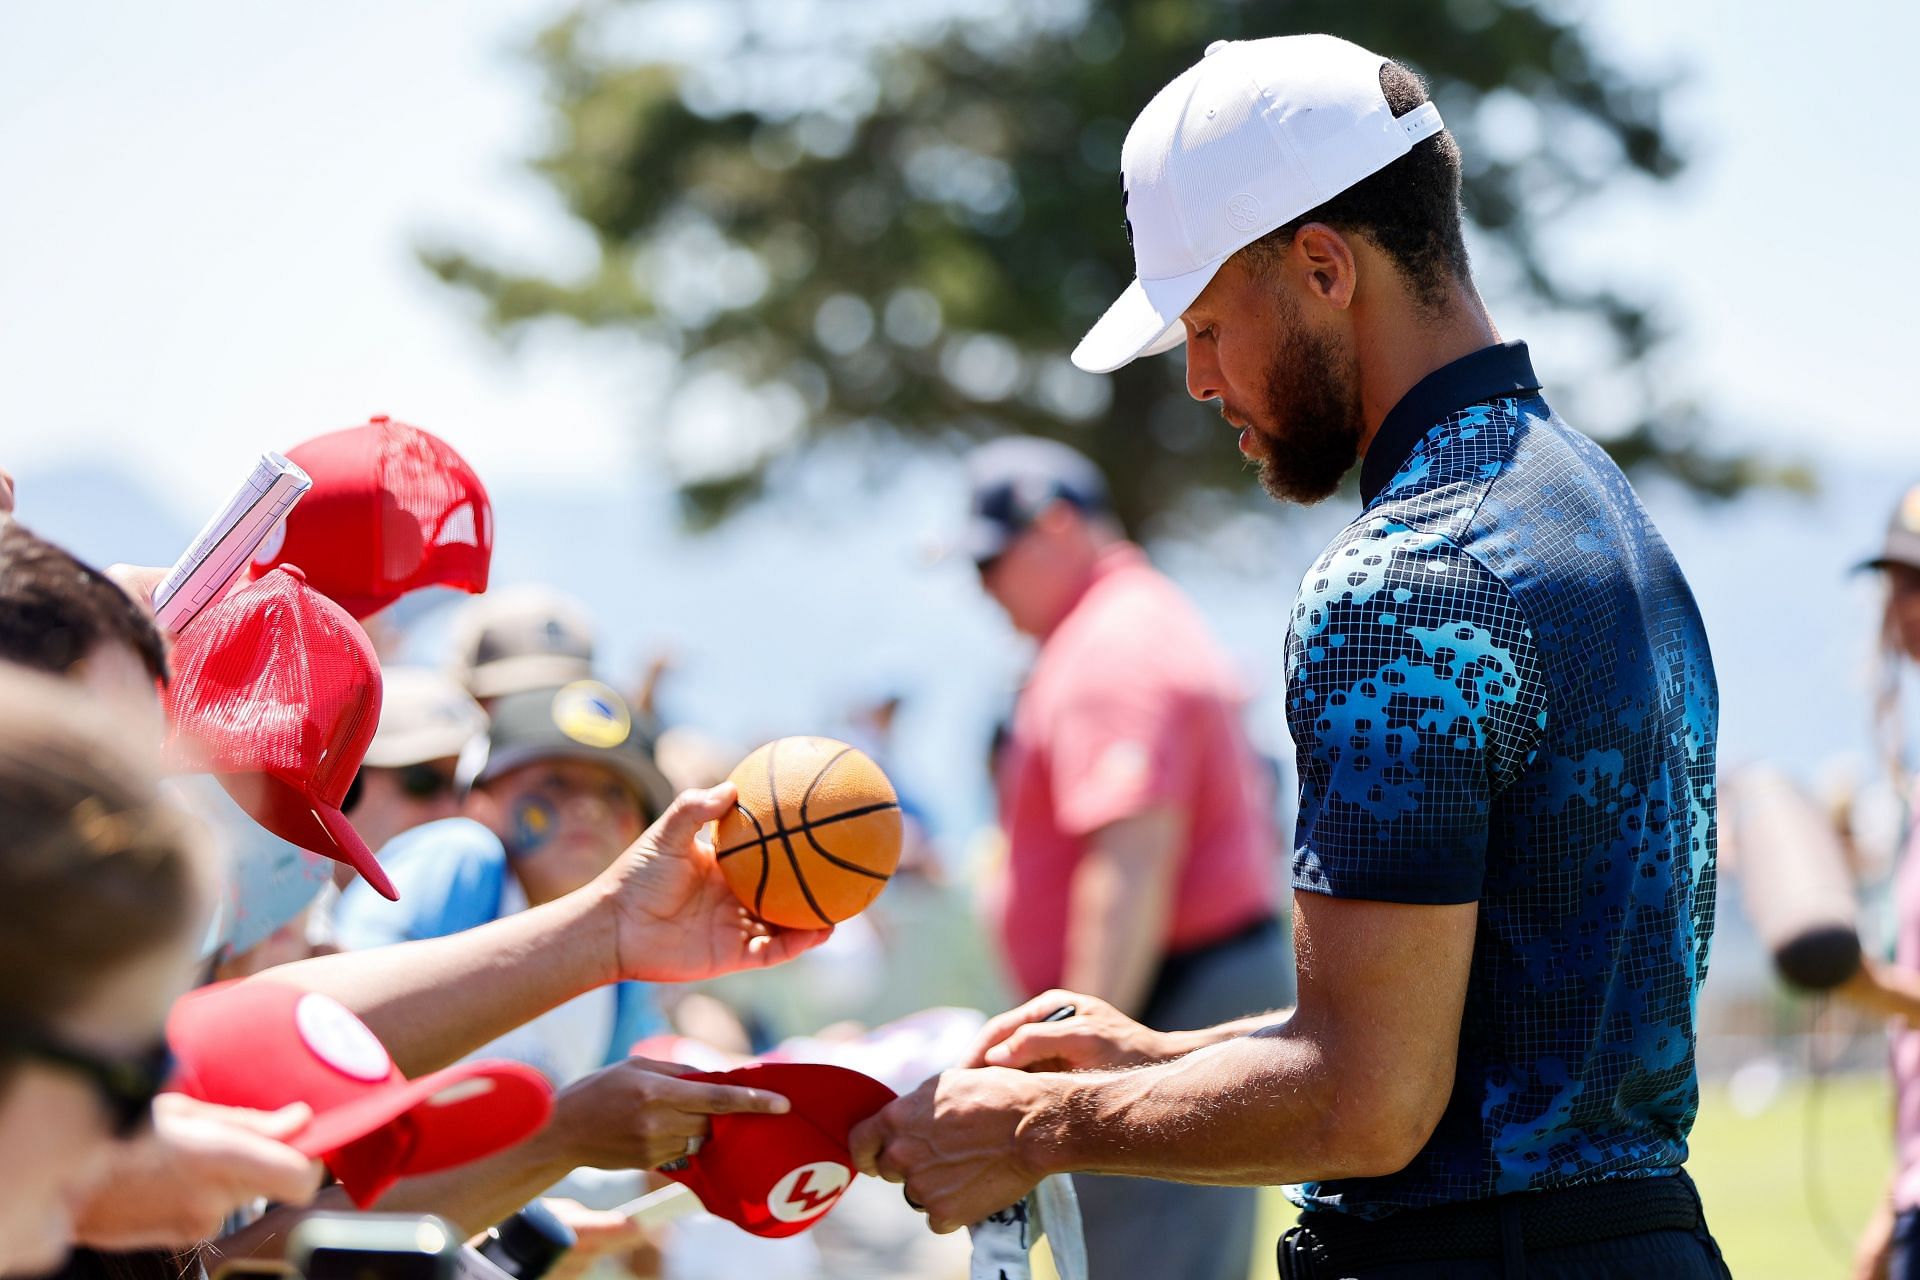 NBA superstar Steph Curry at the final round of the 2022 American Century Championship